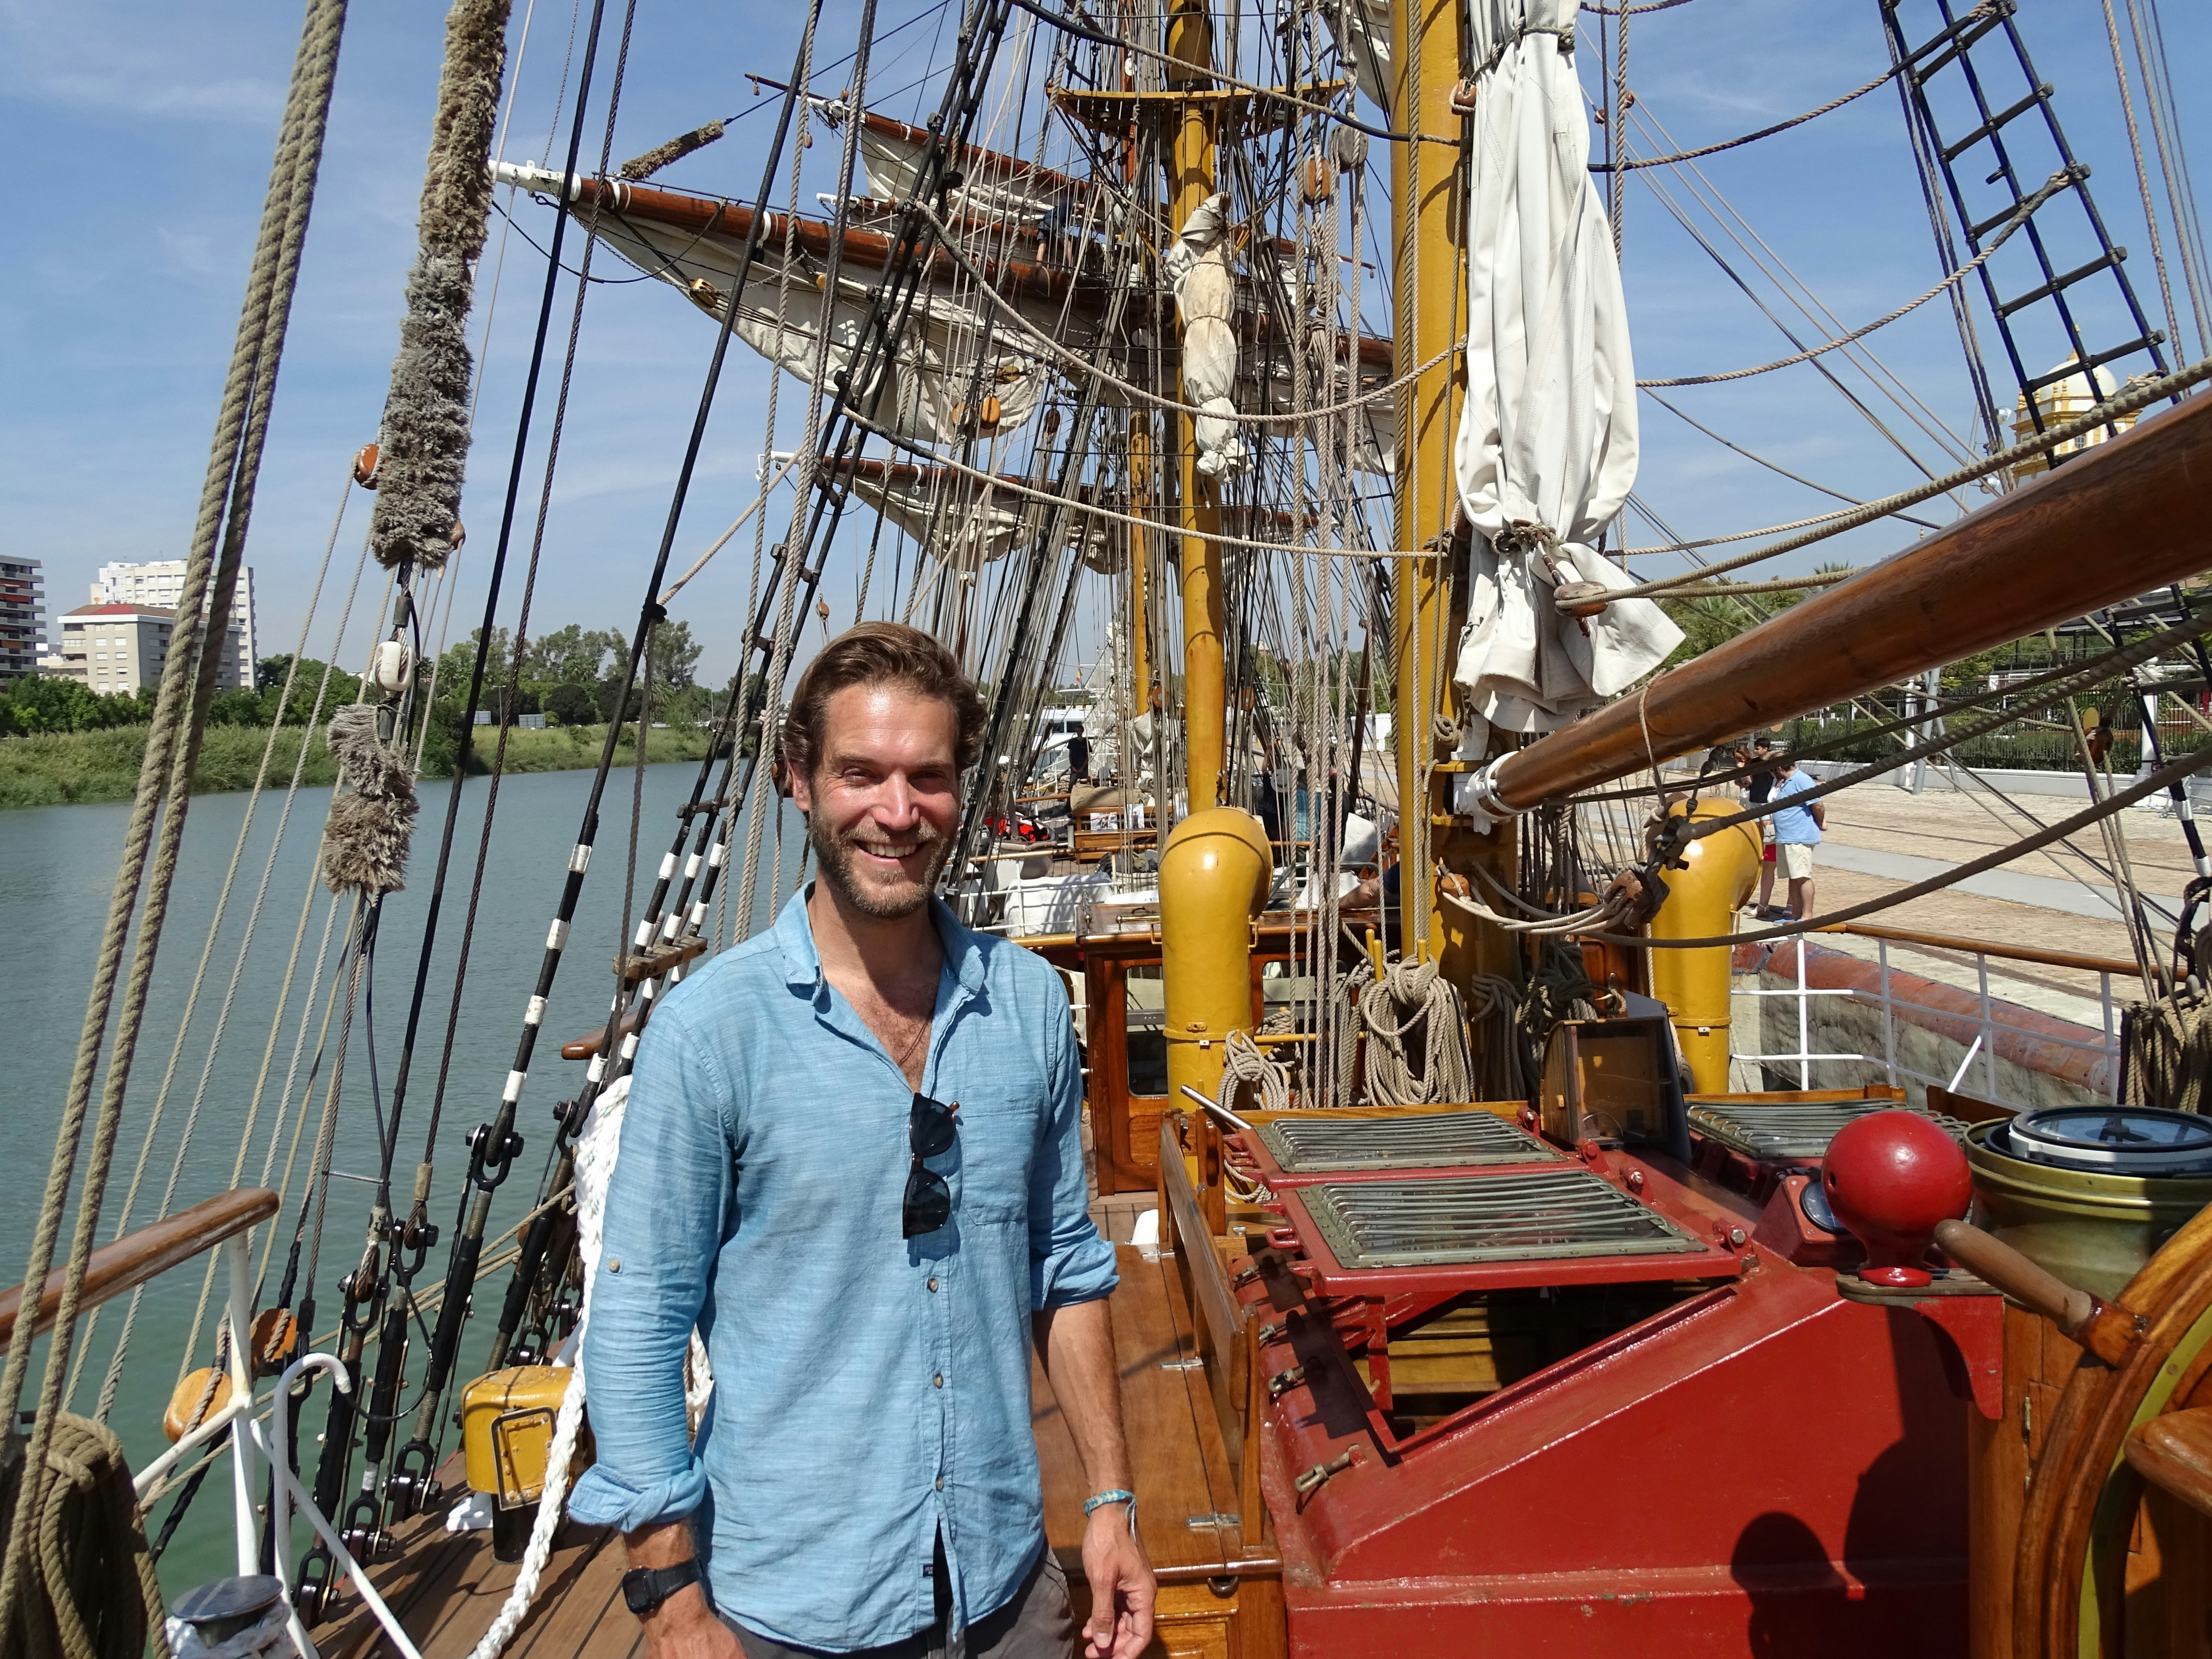 James, wearing a blue shirt, stands on board the tall ship. 